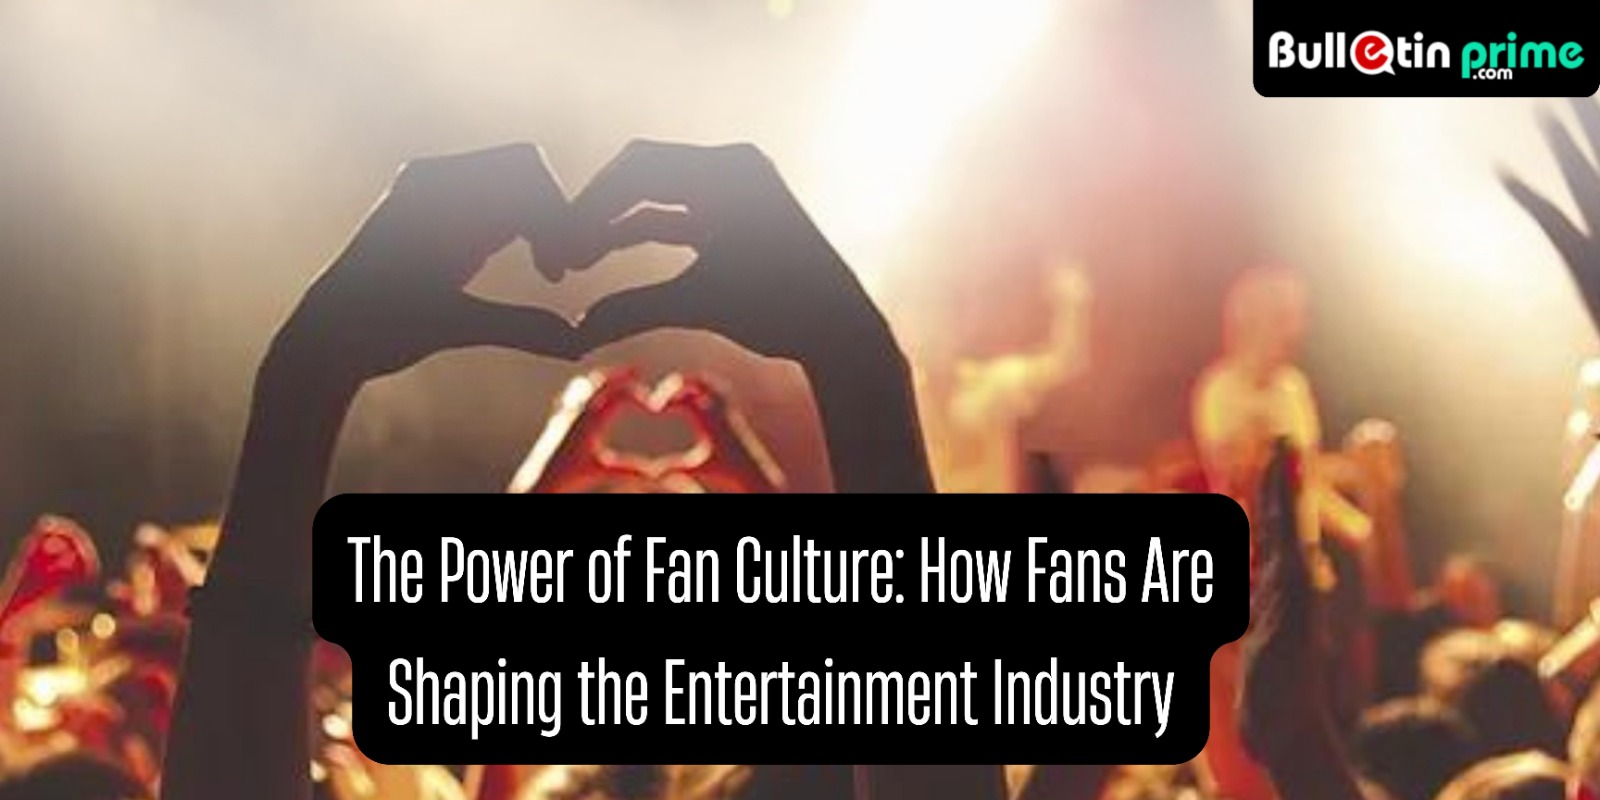 The Power of Fan Culture: How Fans Are Shaping the Entertainment Industry